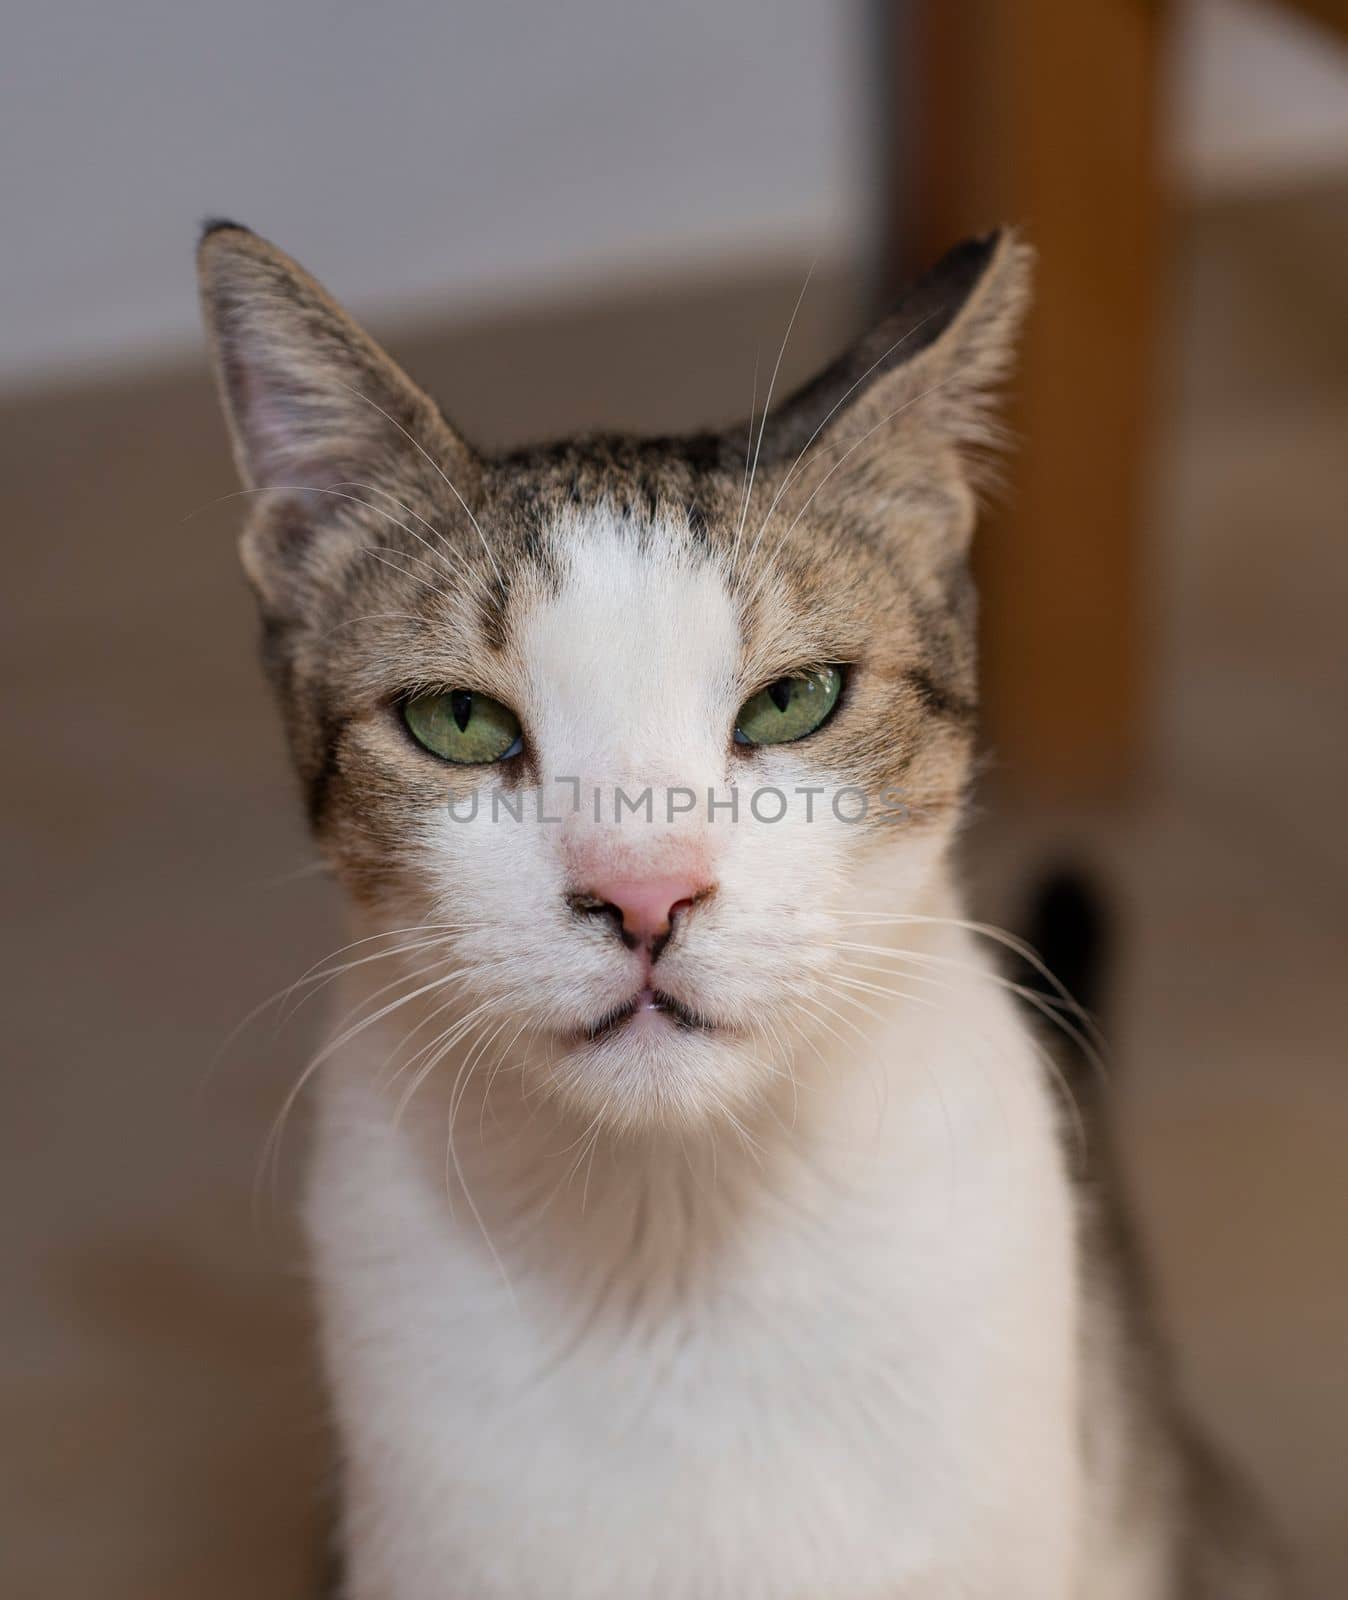 Cute domestic house cat with humorous expression on face by paulvinten